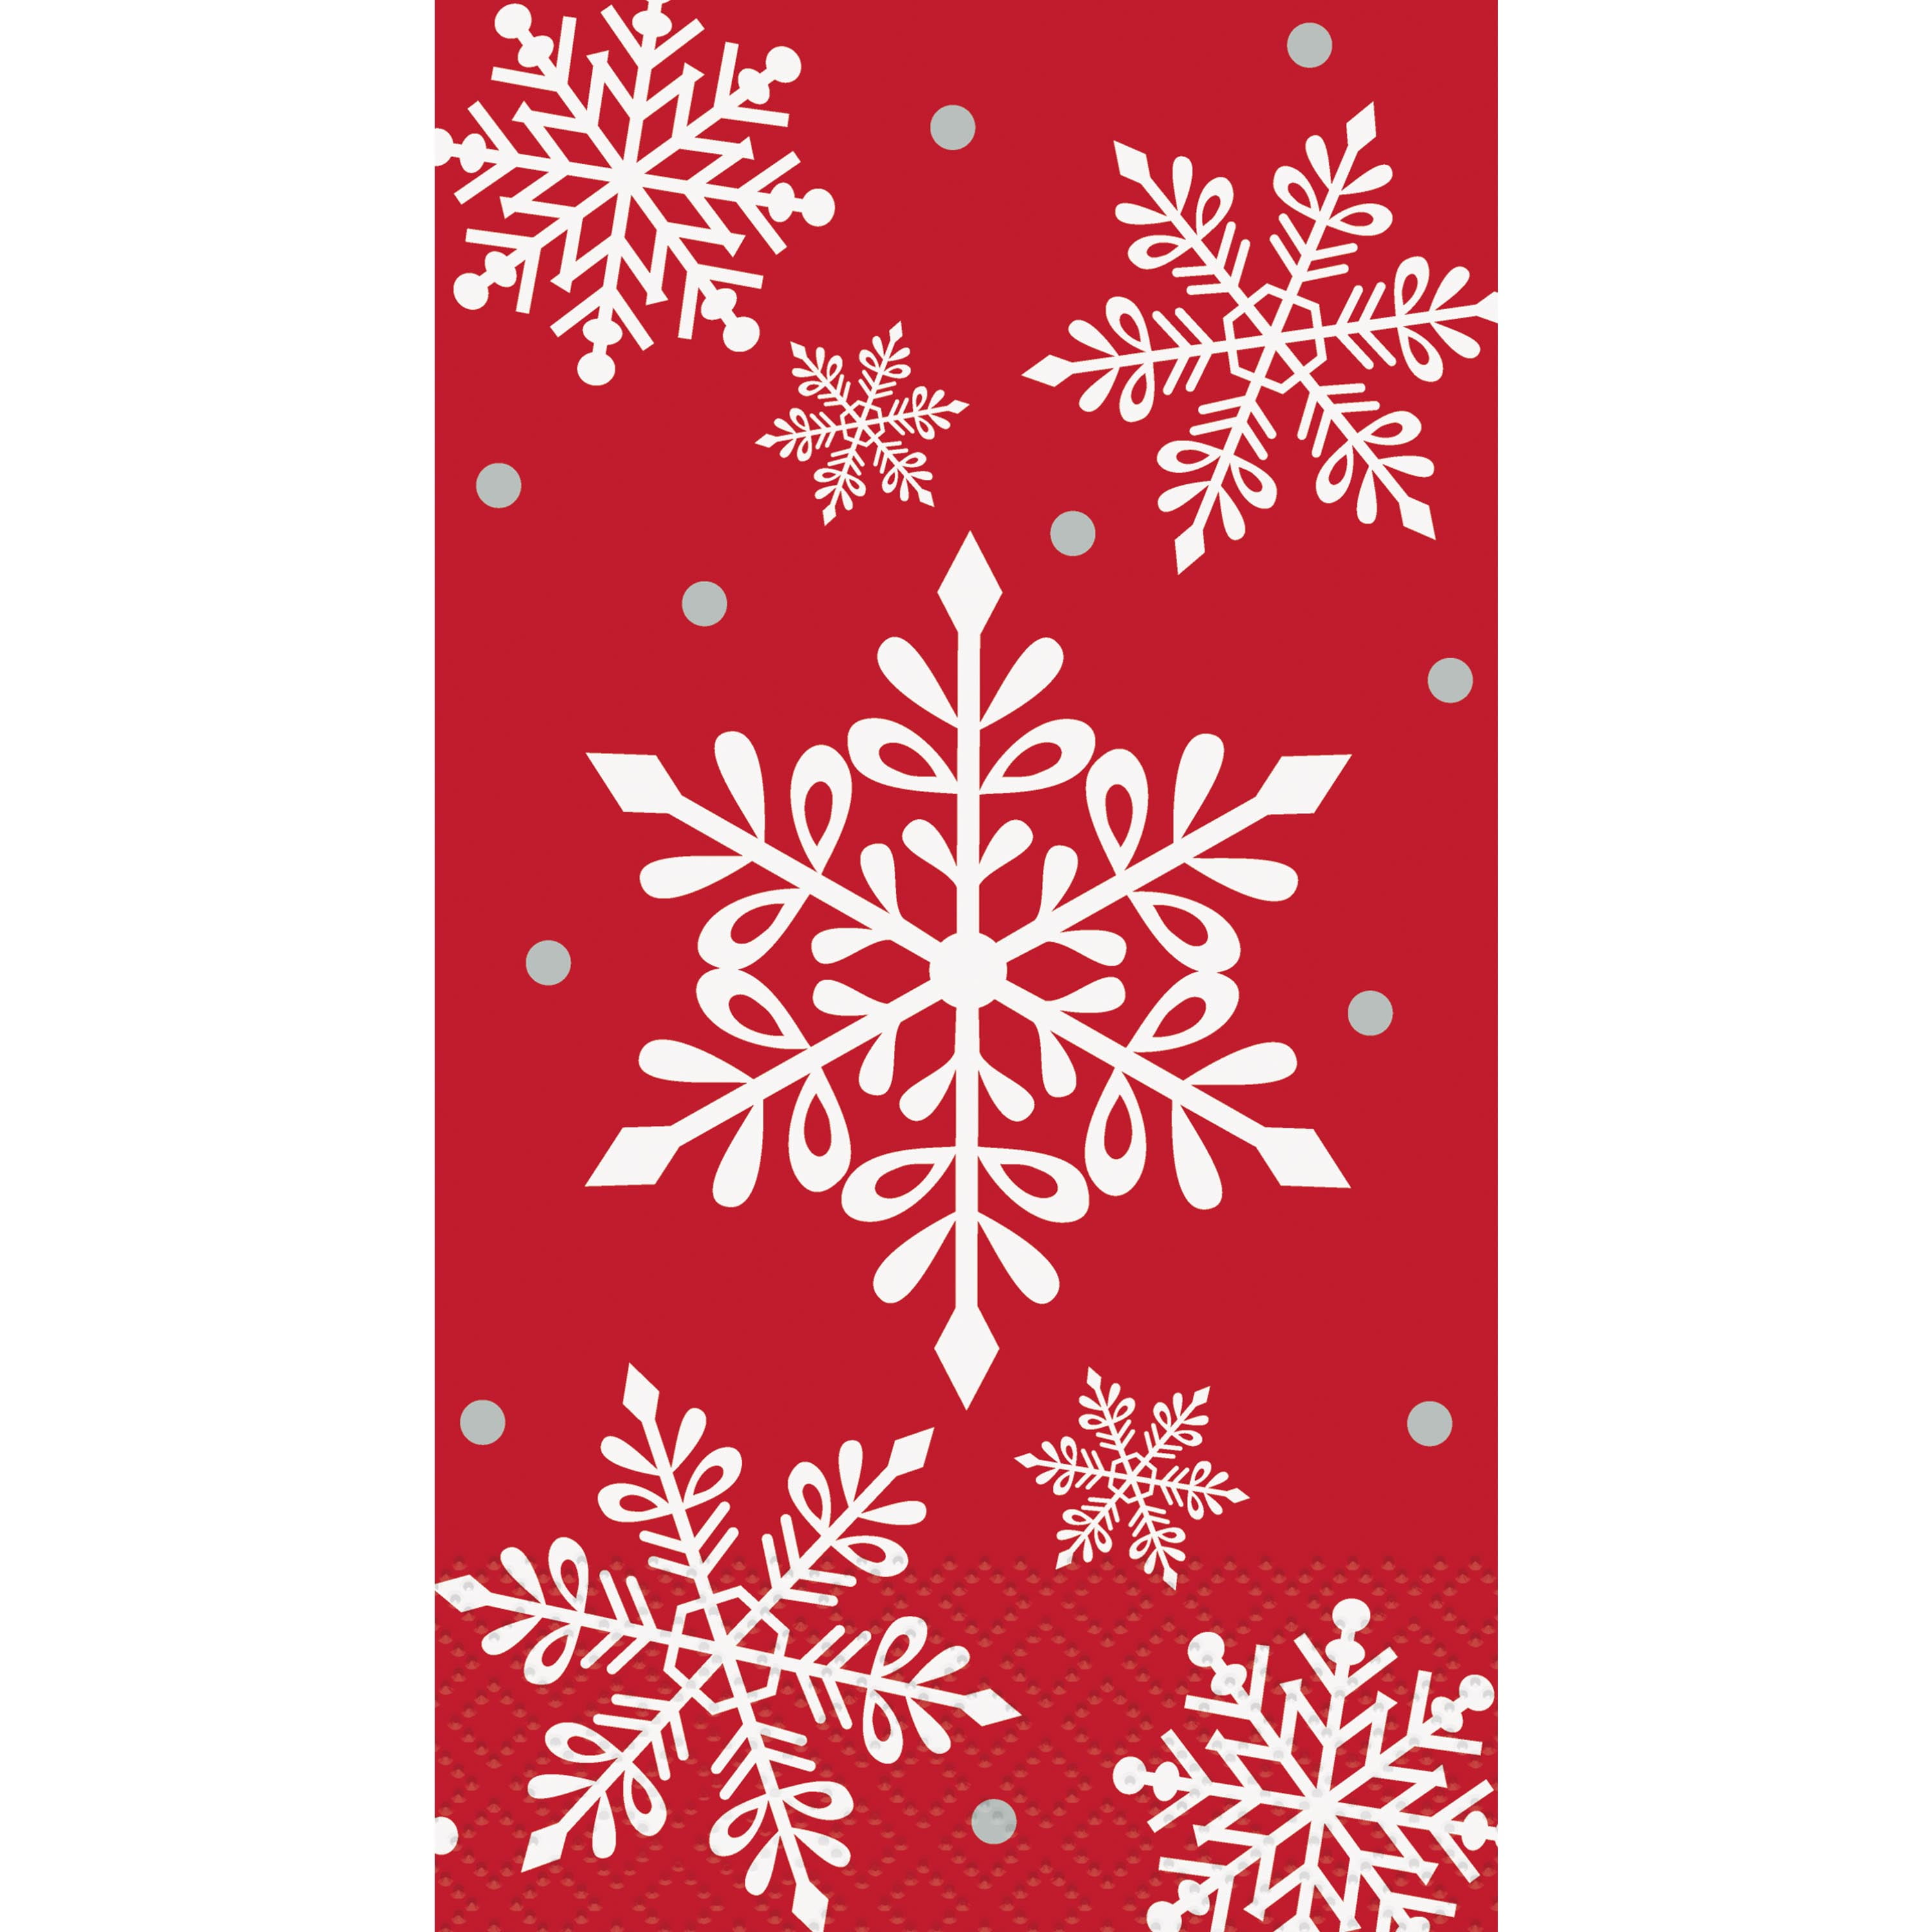 50 Snowflake Design Disposable Holiday Dinner Hand Towel Paper Napkins 2-Ply 